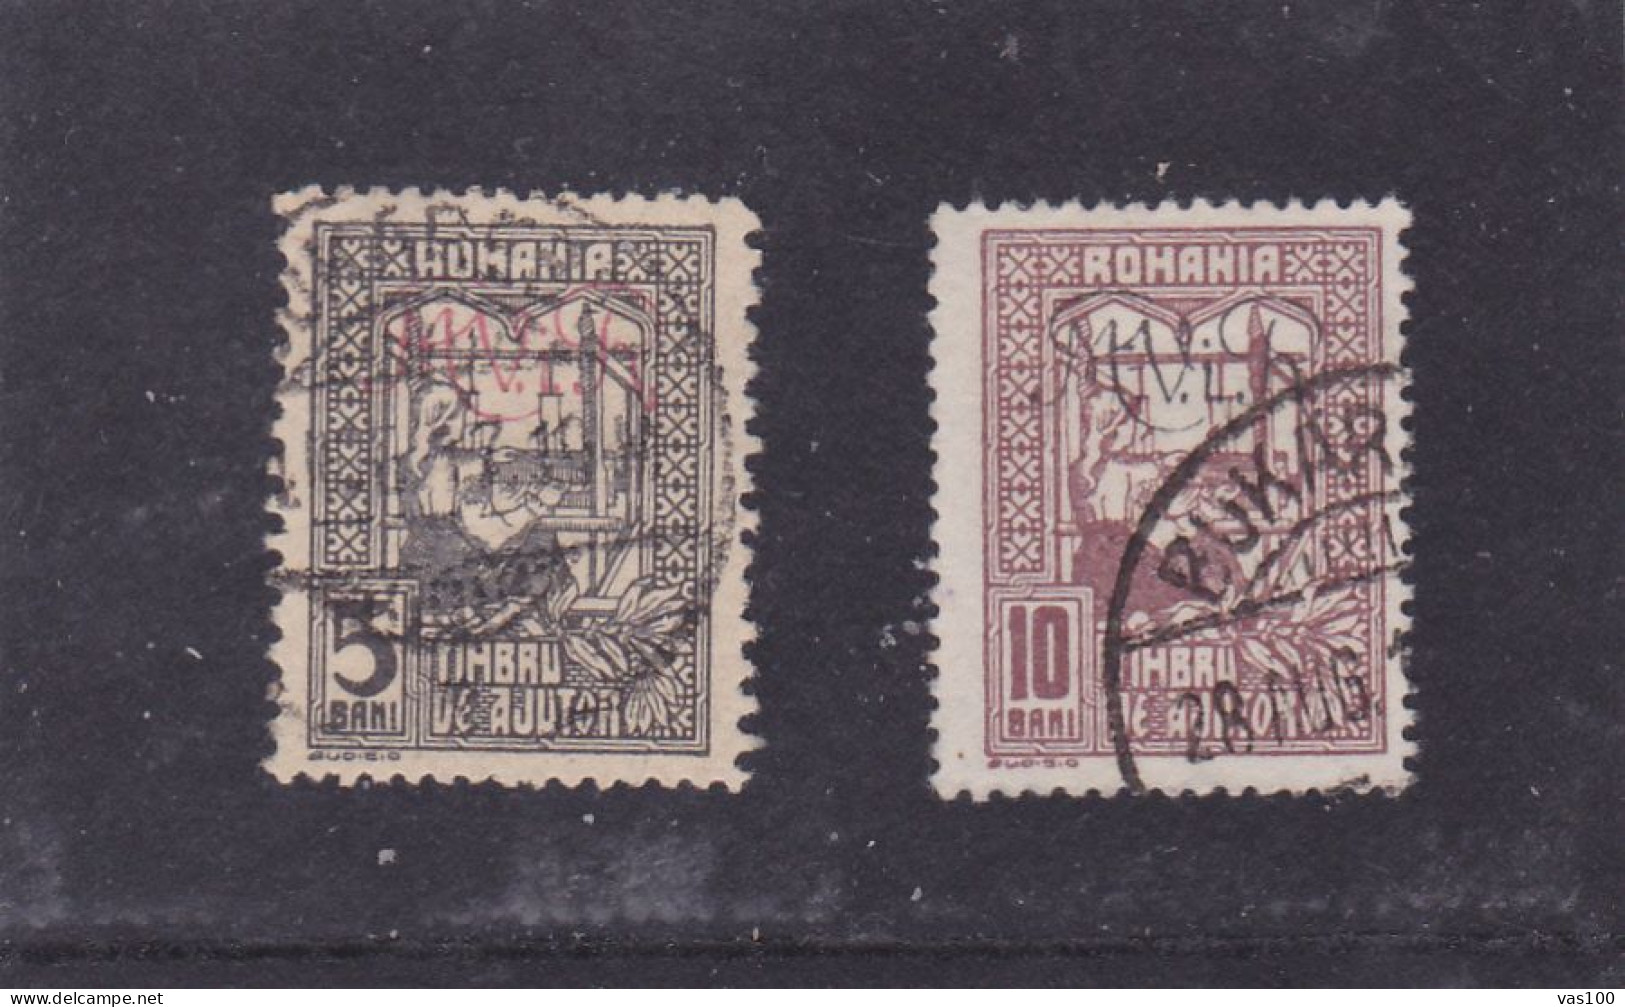 Germany WW1 Occupation In Romania 1917 MViR  2 STAMPS POSTAGE DUE USED - Occupations